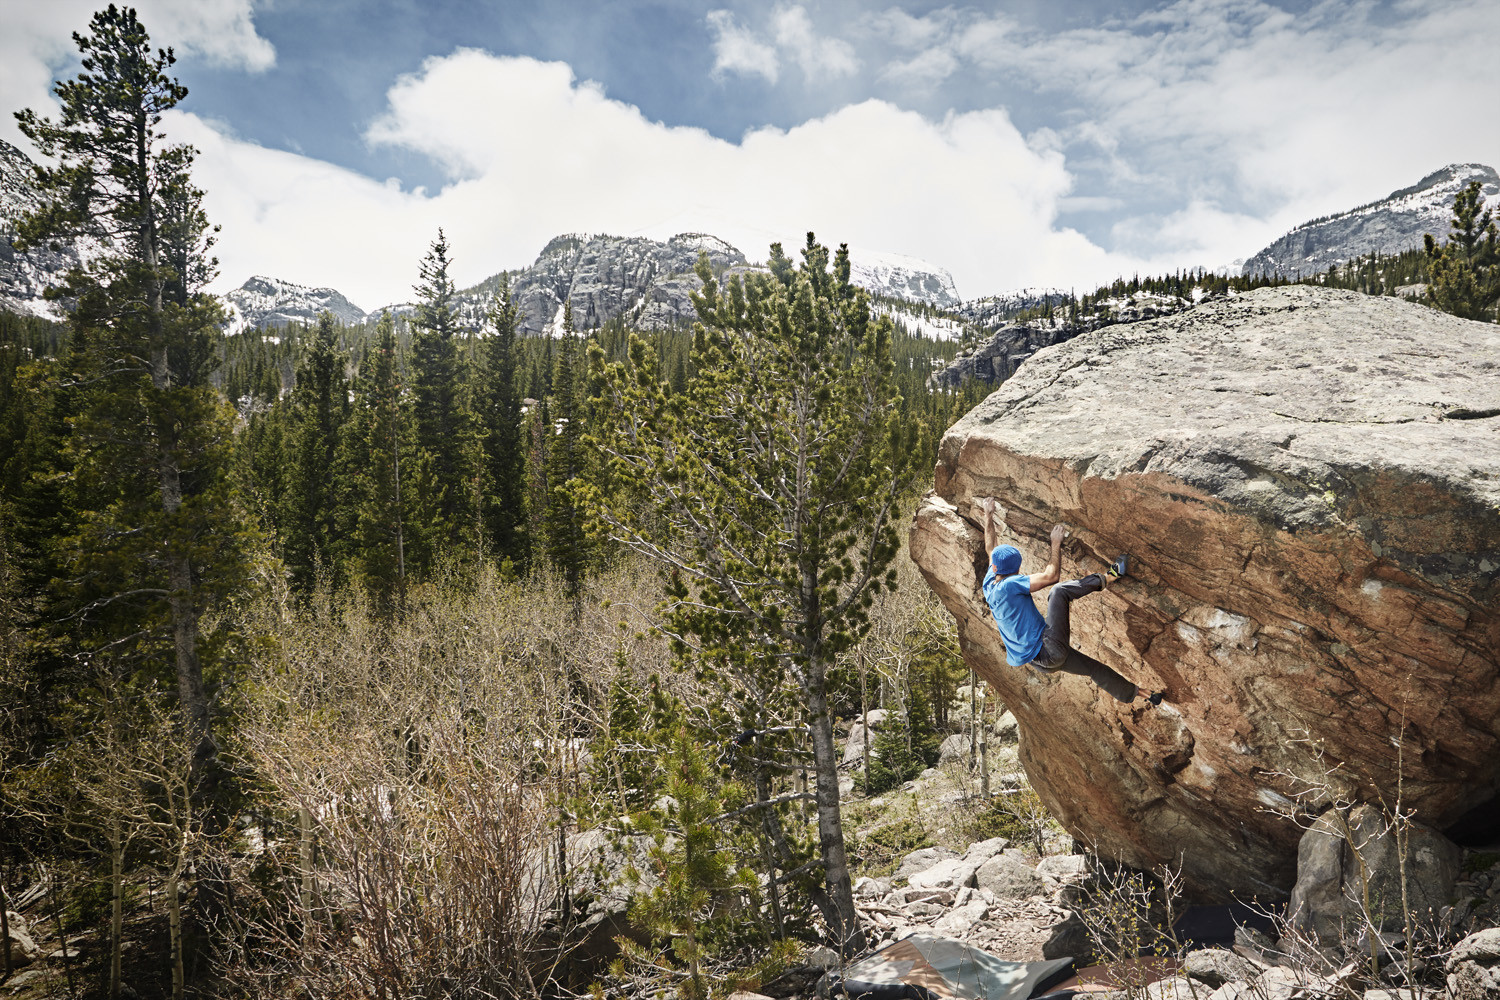 Ian Cotter-Brown Climbing in Rocky Mountain National Park